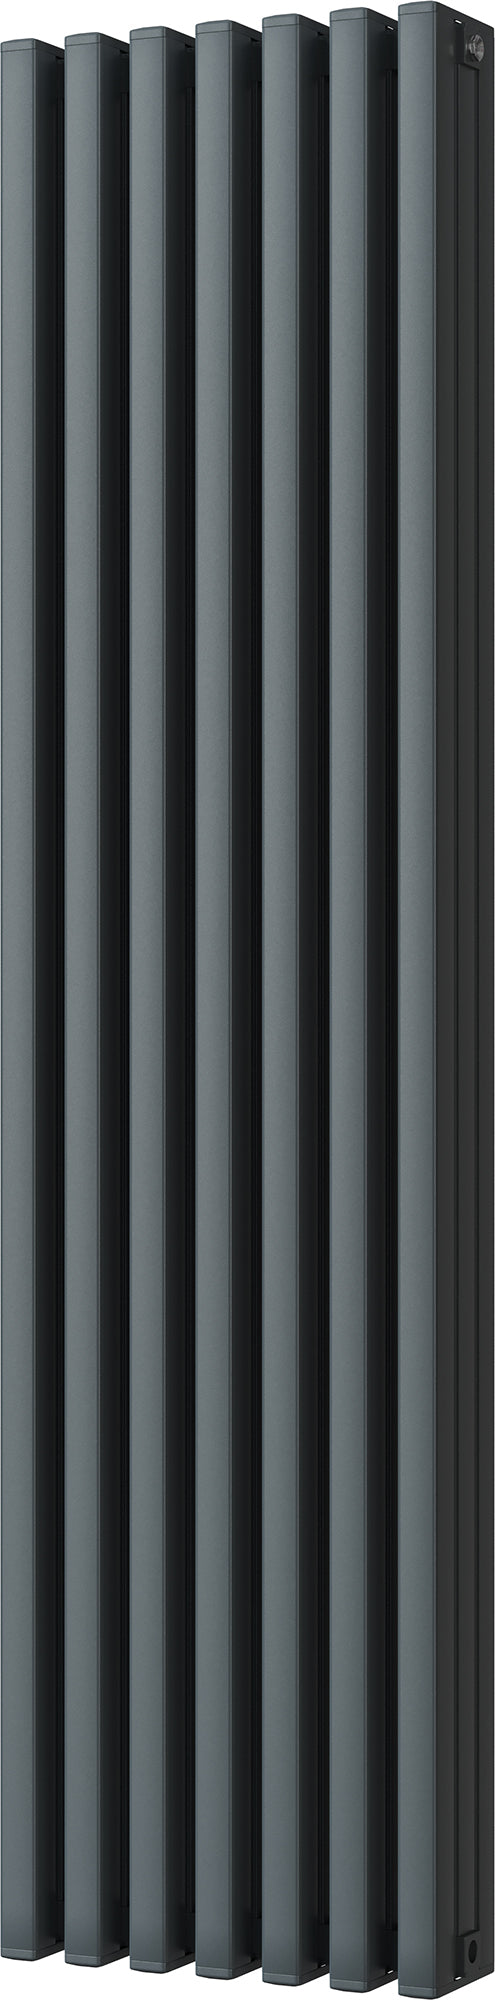 Temple - Anthracite Vertical Square Tube Column Radiator H1800mm x W460mm